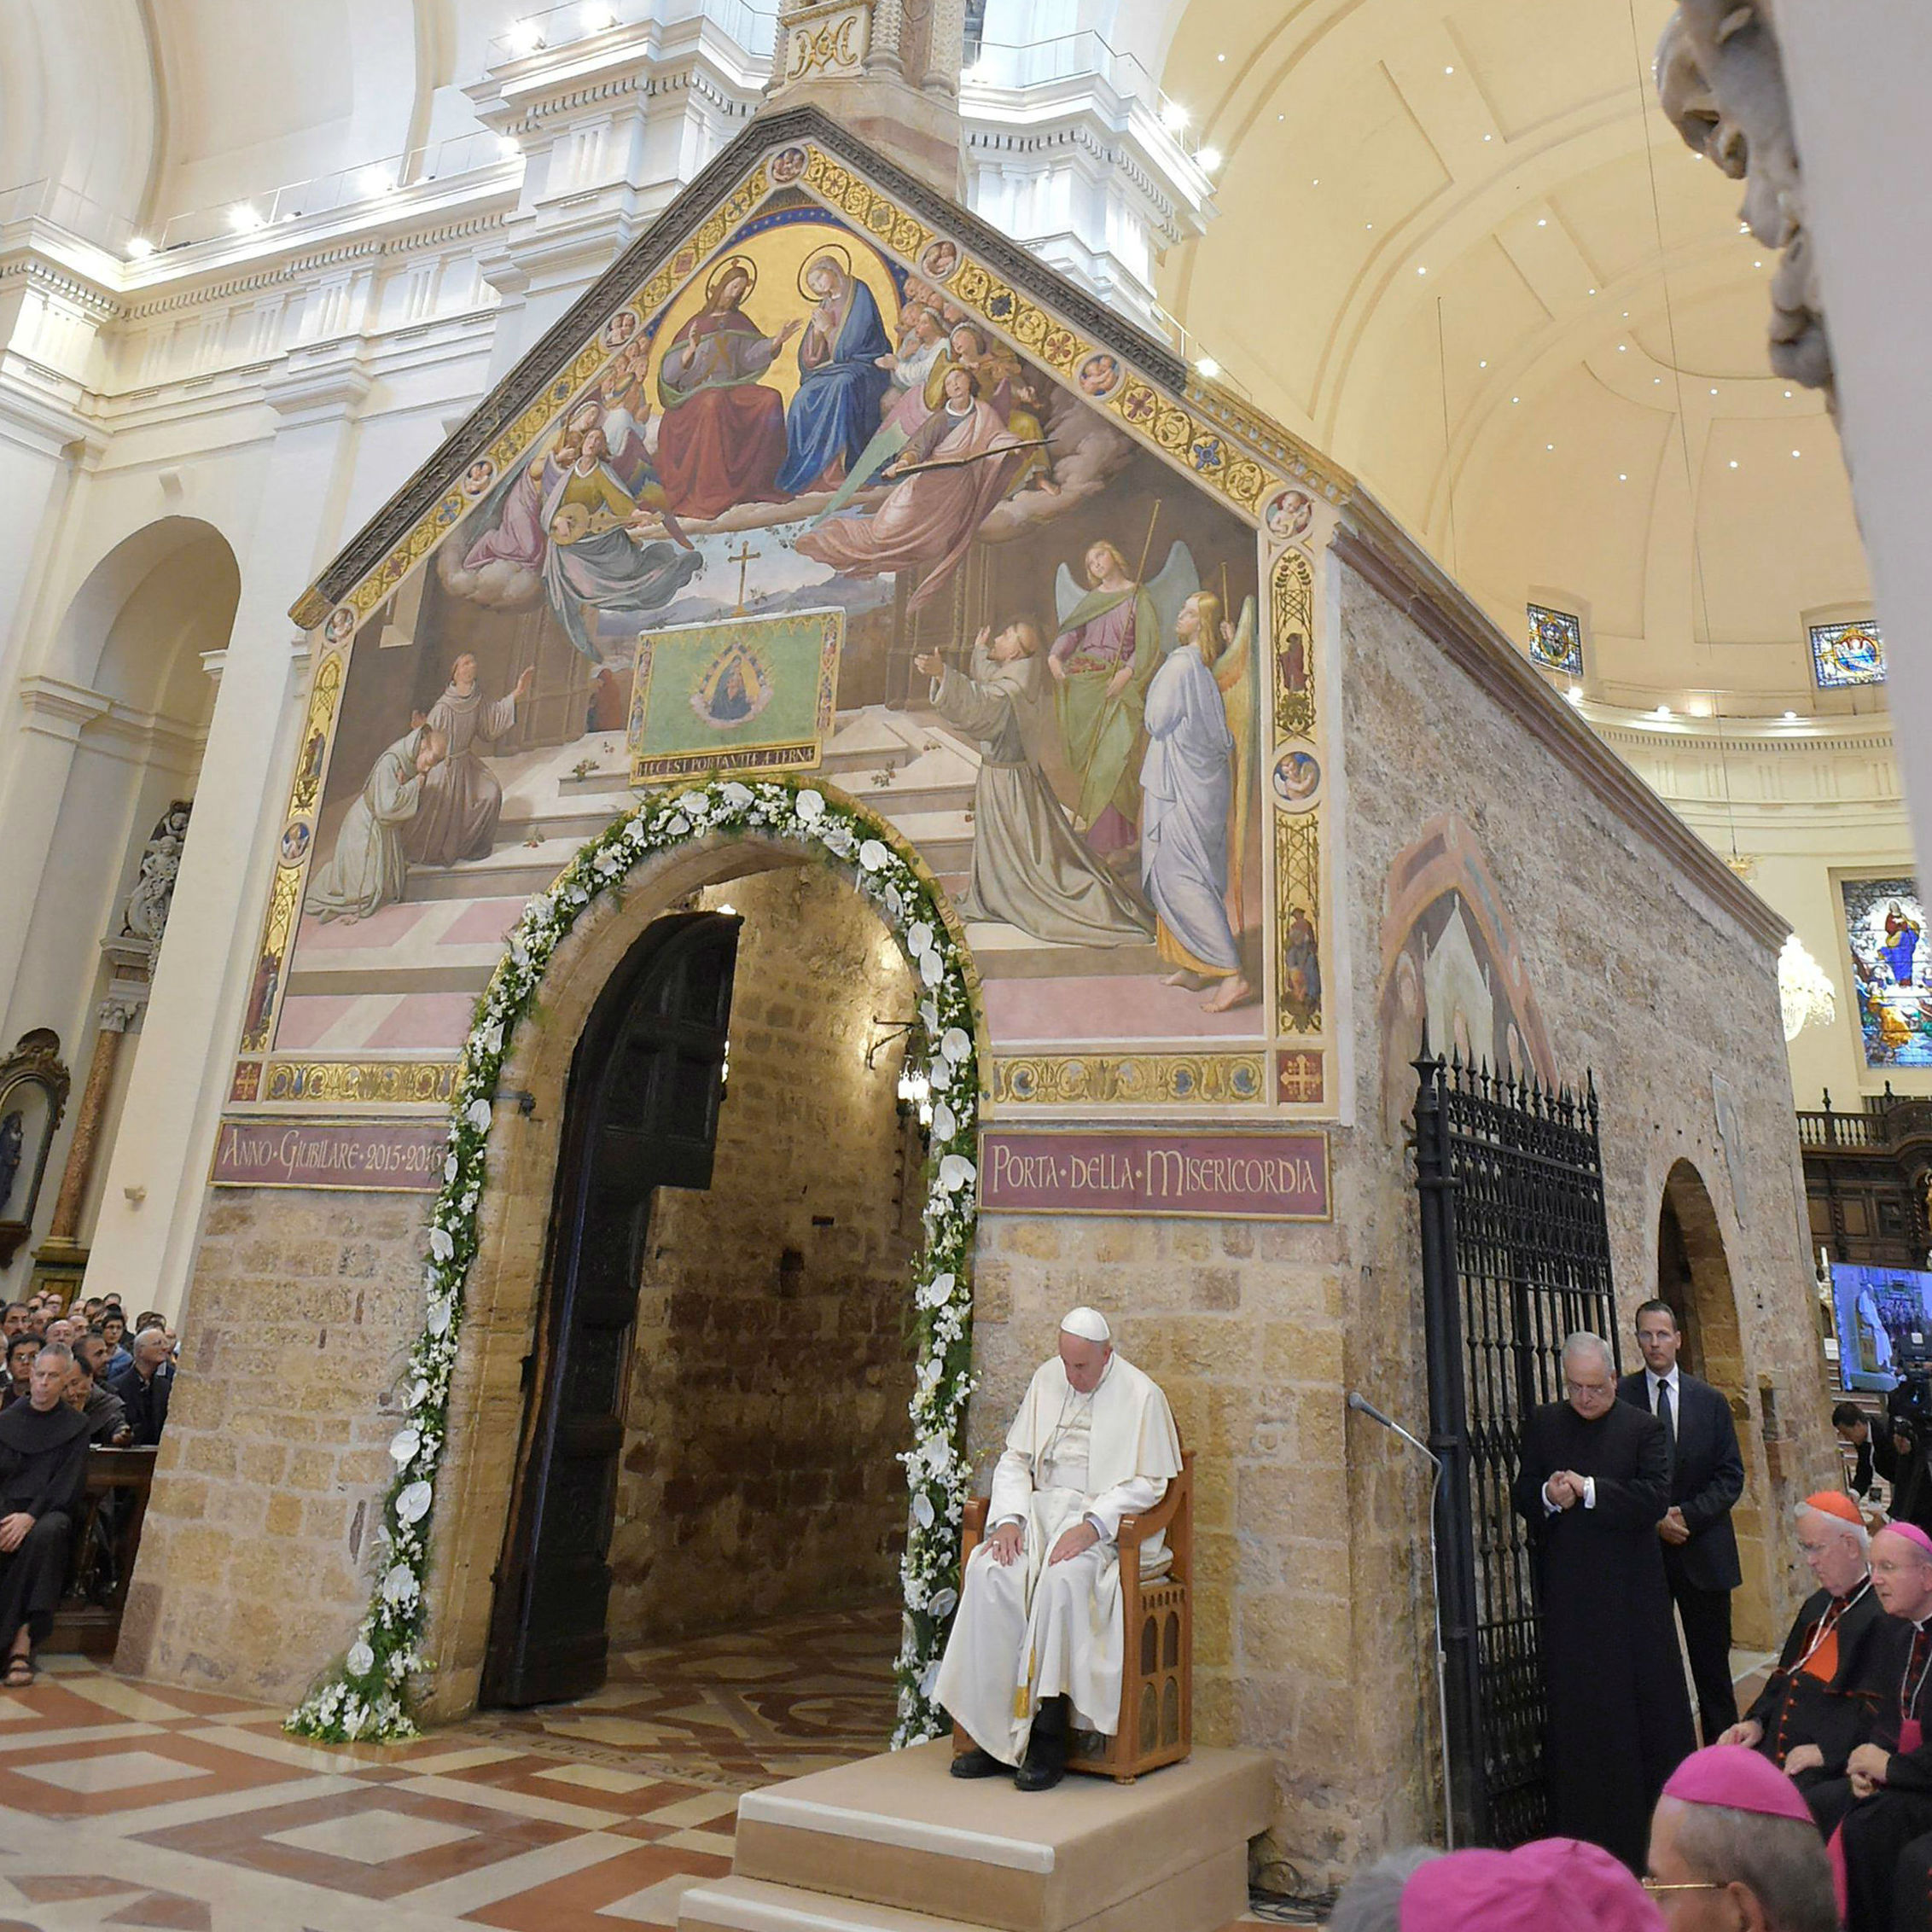 Forgiveness is 'direct route' to Heaven, says Pope Francis on Assisi pilgrimage